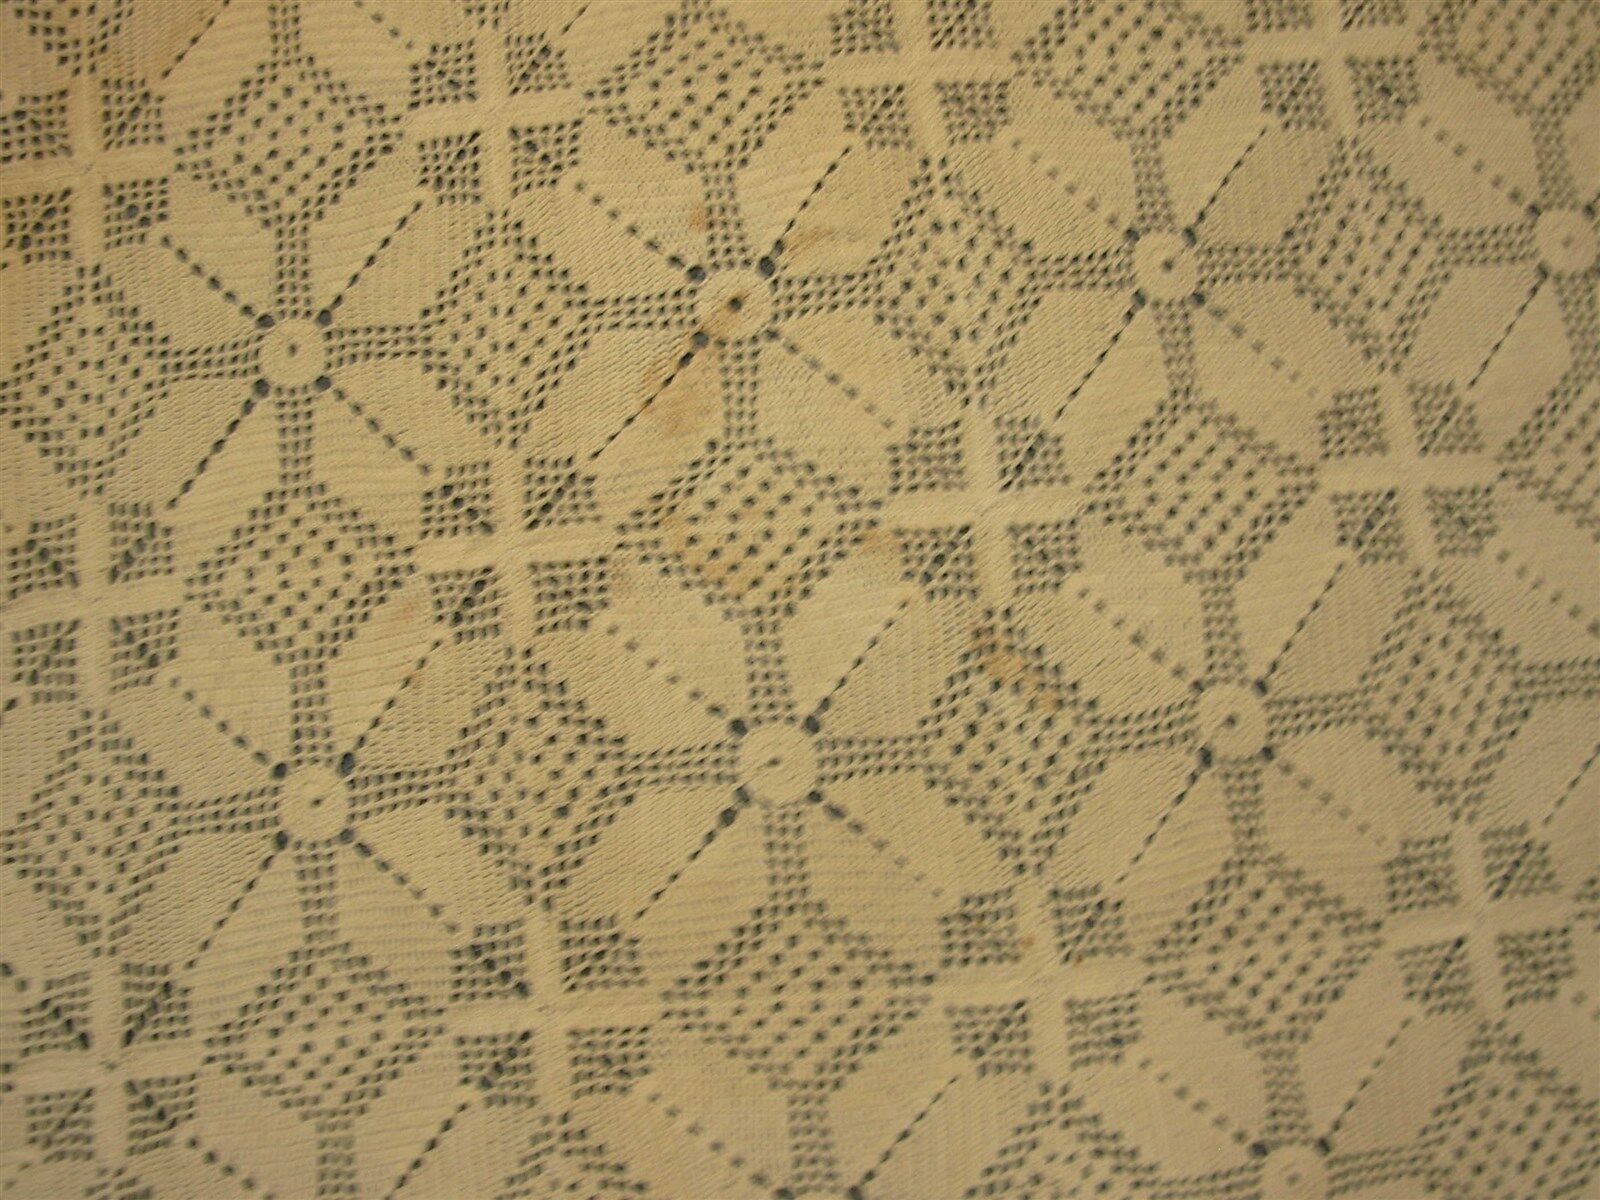 ANTIQUE BEIGE HAND CROCHETED TABLECLOTH with PINWHEEL & FLOWER BORDER 68\